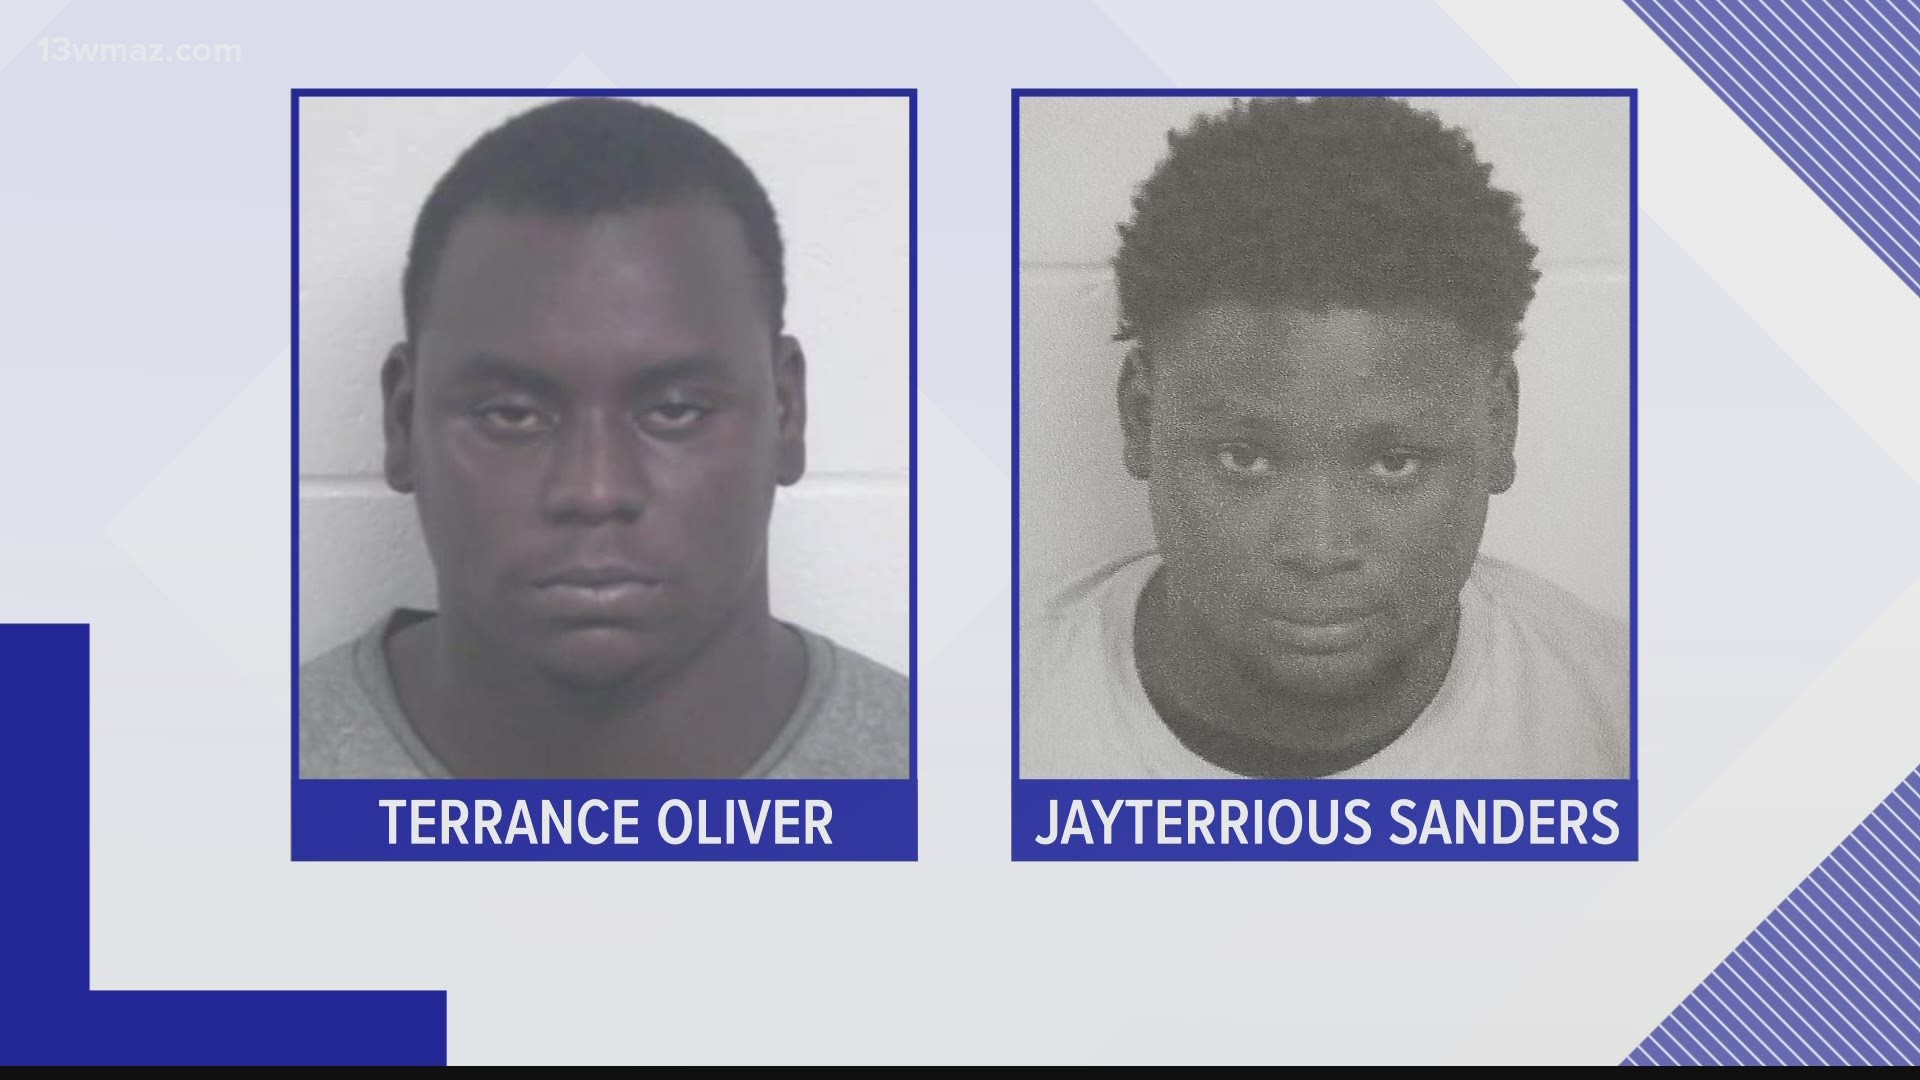 According to a post on the Sandersville Police Department's Facebook page, police are looking for Terrance Oliver and Jayterrious Sanders